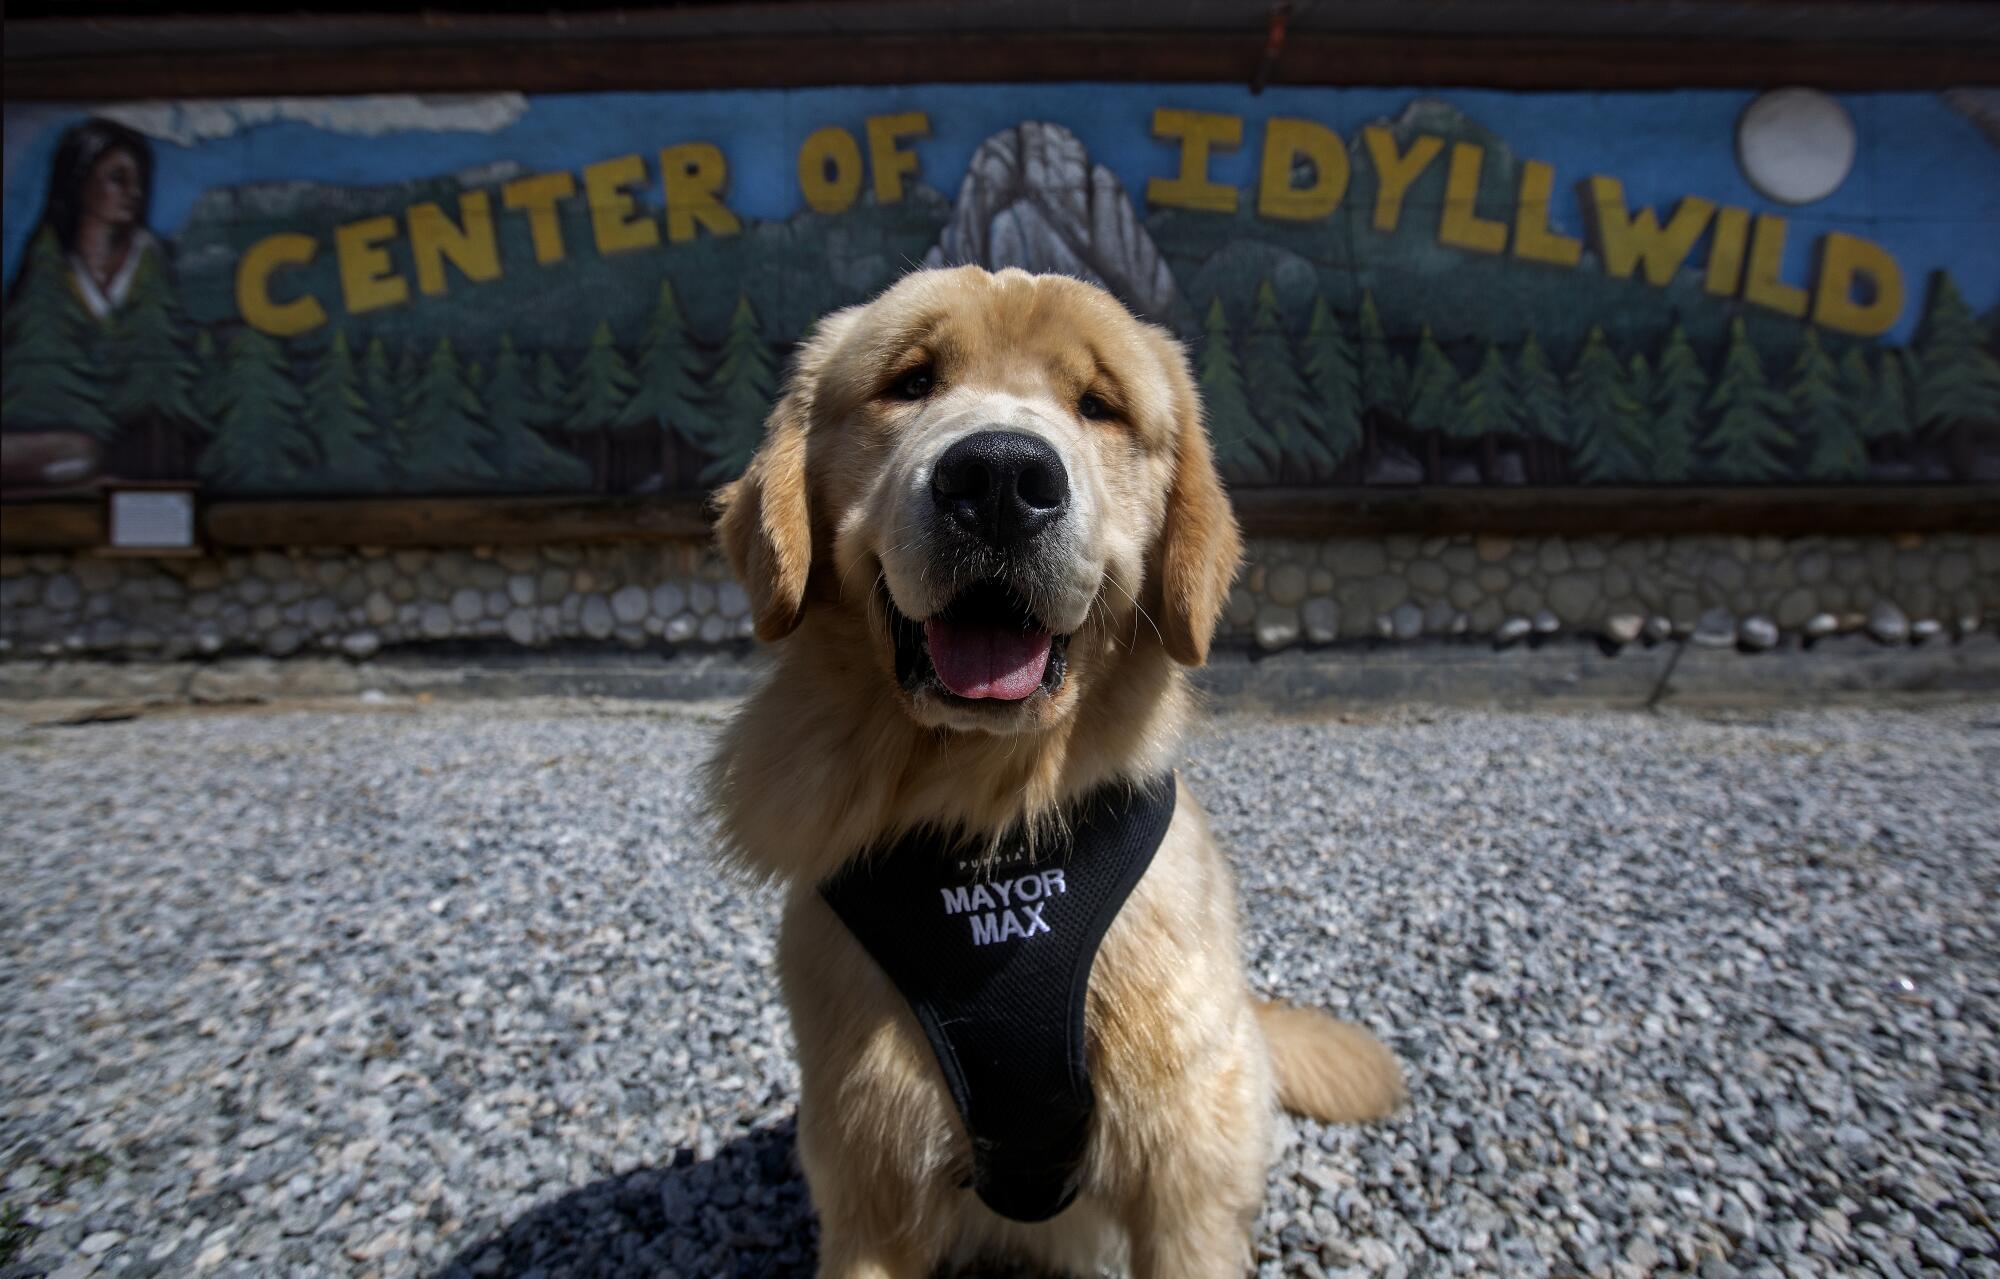 Mayor Max, a golden retriever, poses in Idyllwild.